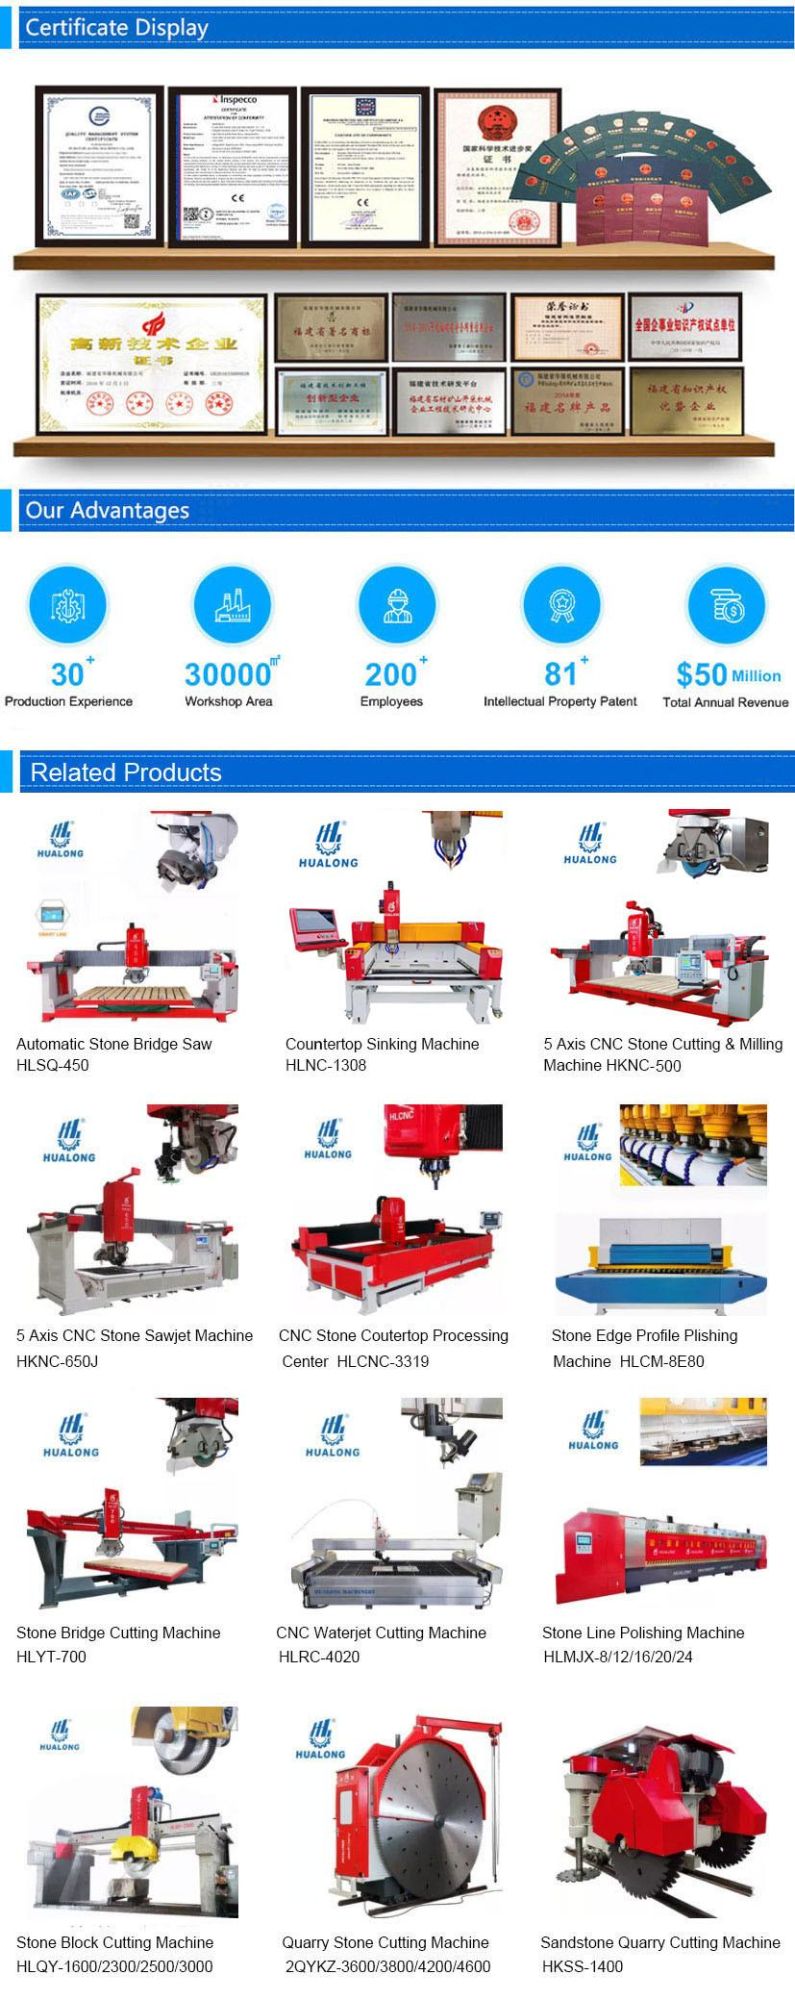 China Hualong Stone Machinery High Water Pressure 5 Axis CNC Stone Glass Metal Waterjet Cutting Machine for Granite Marble Tile Cutter Leather Countertop Price